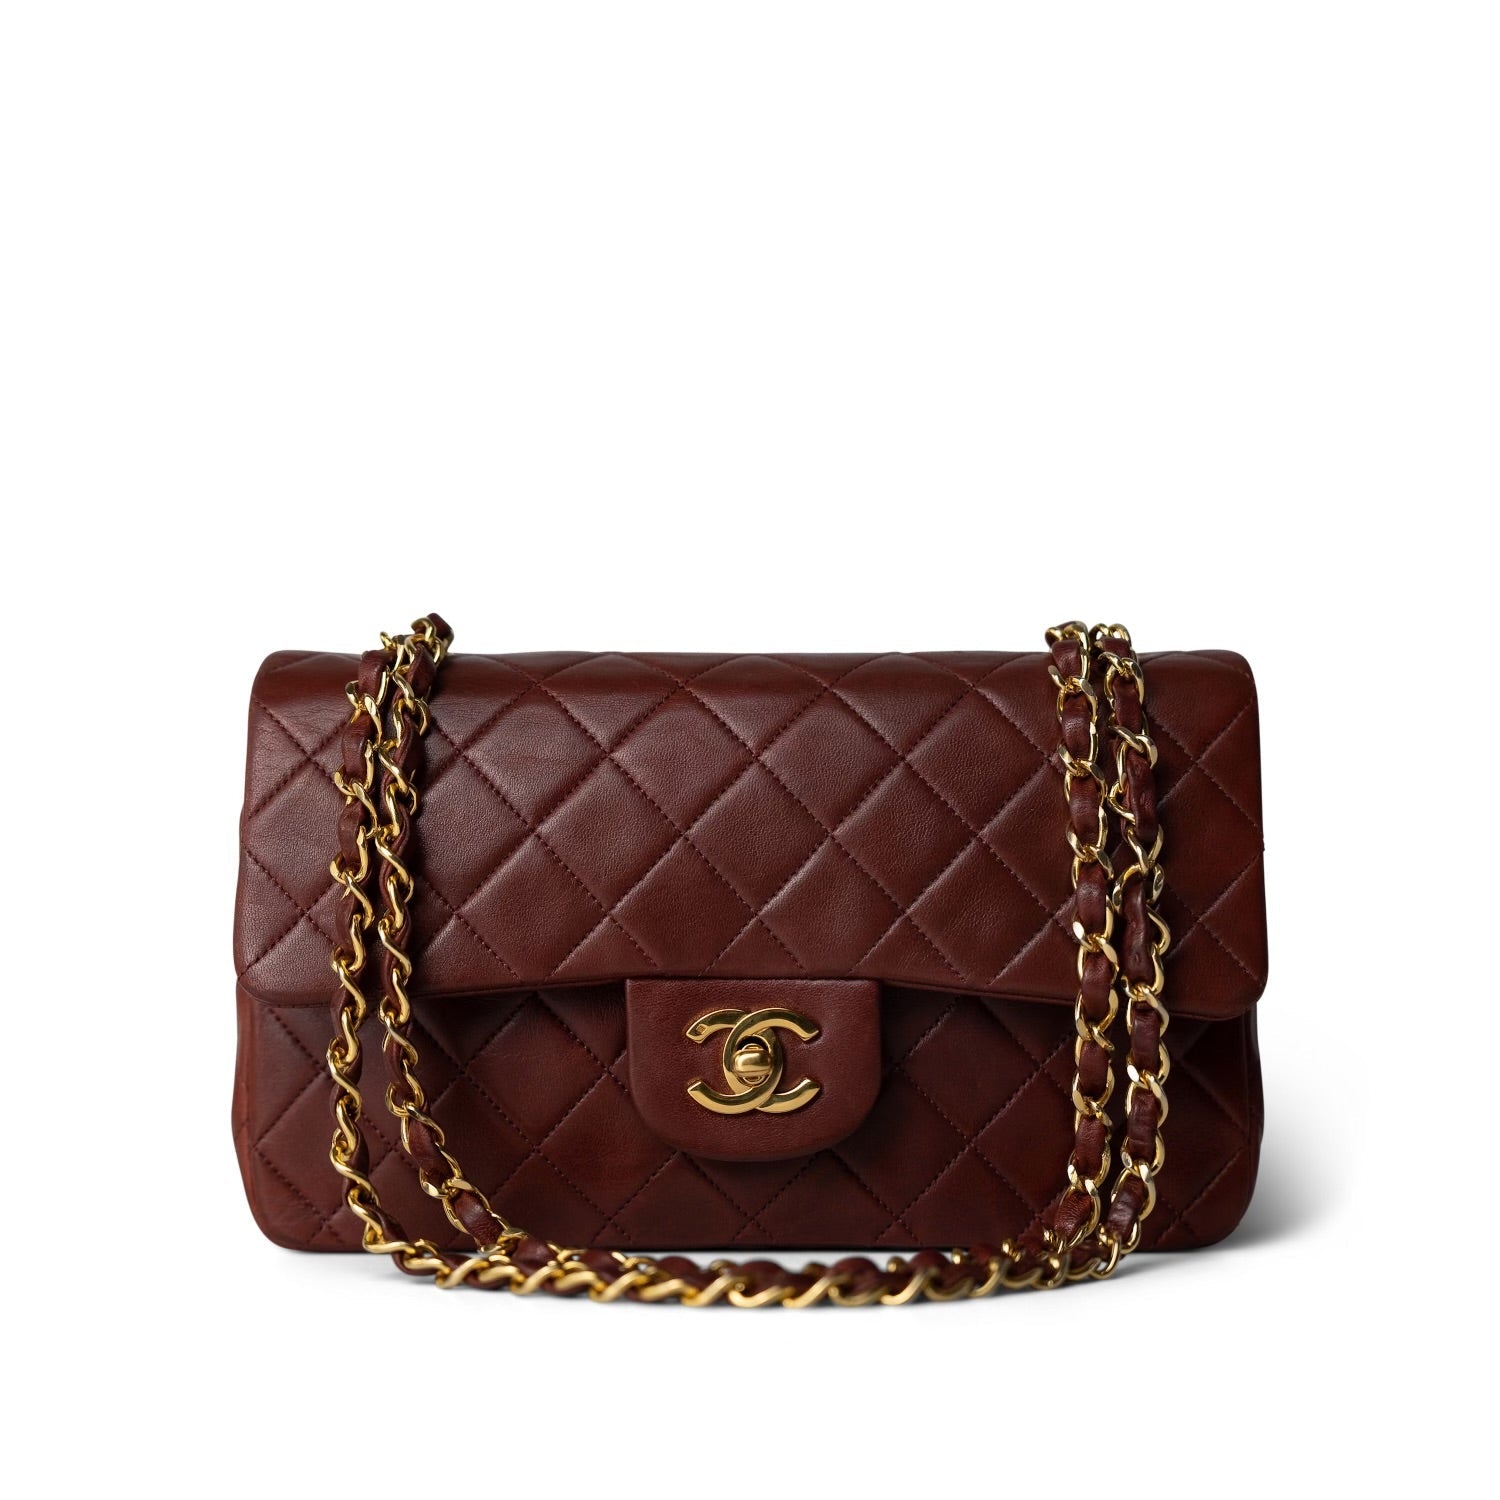 Shop Pre-owned Chanel Bags | Authenticity Guaranteed | Redeluxe 